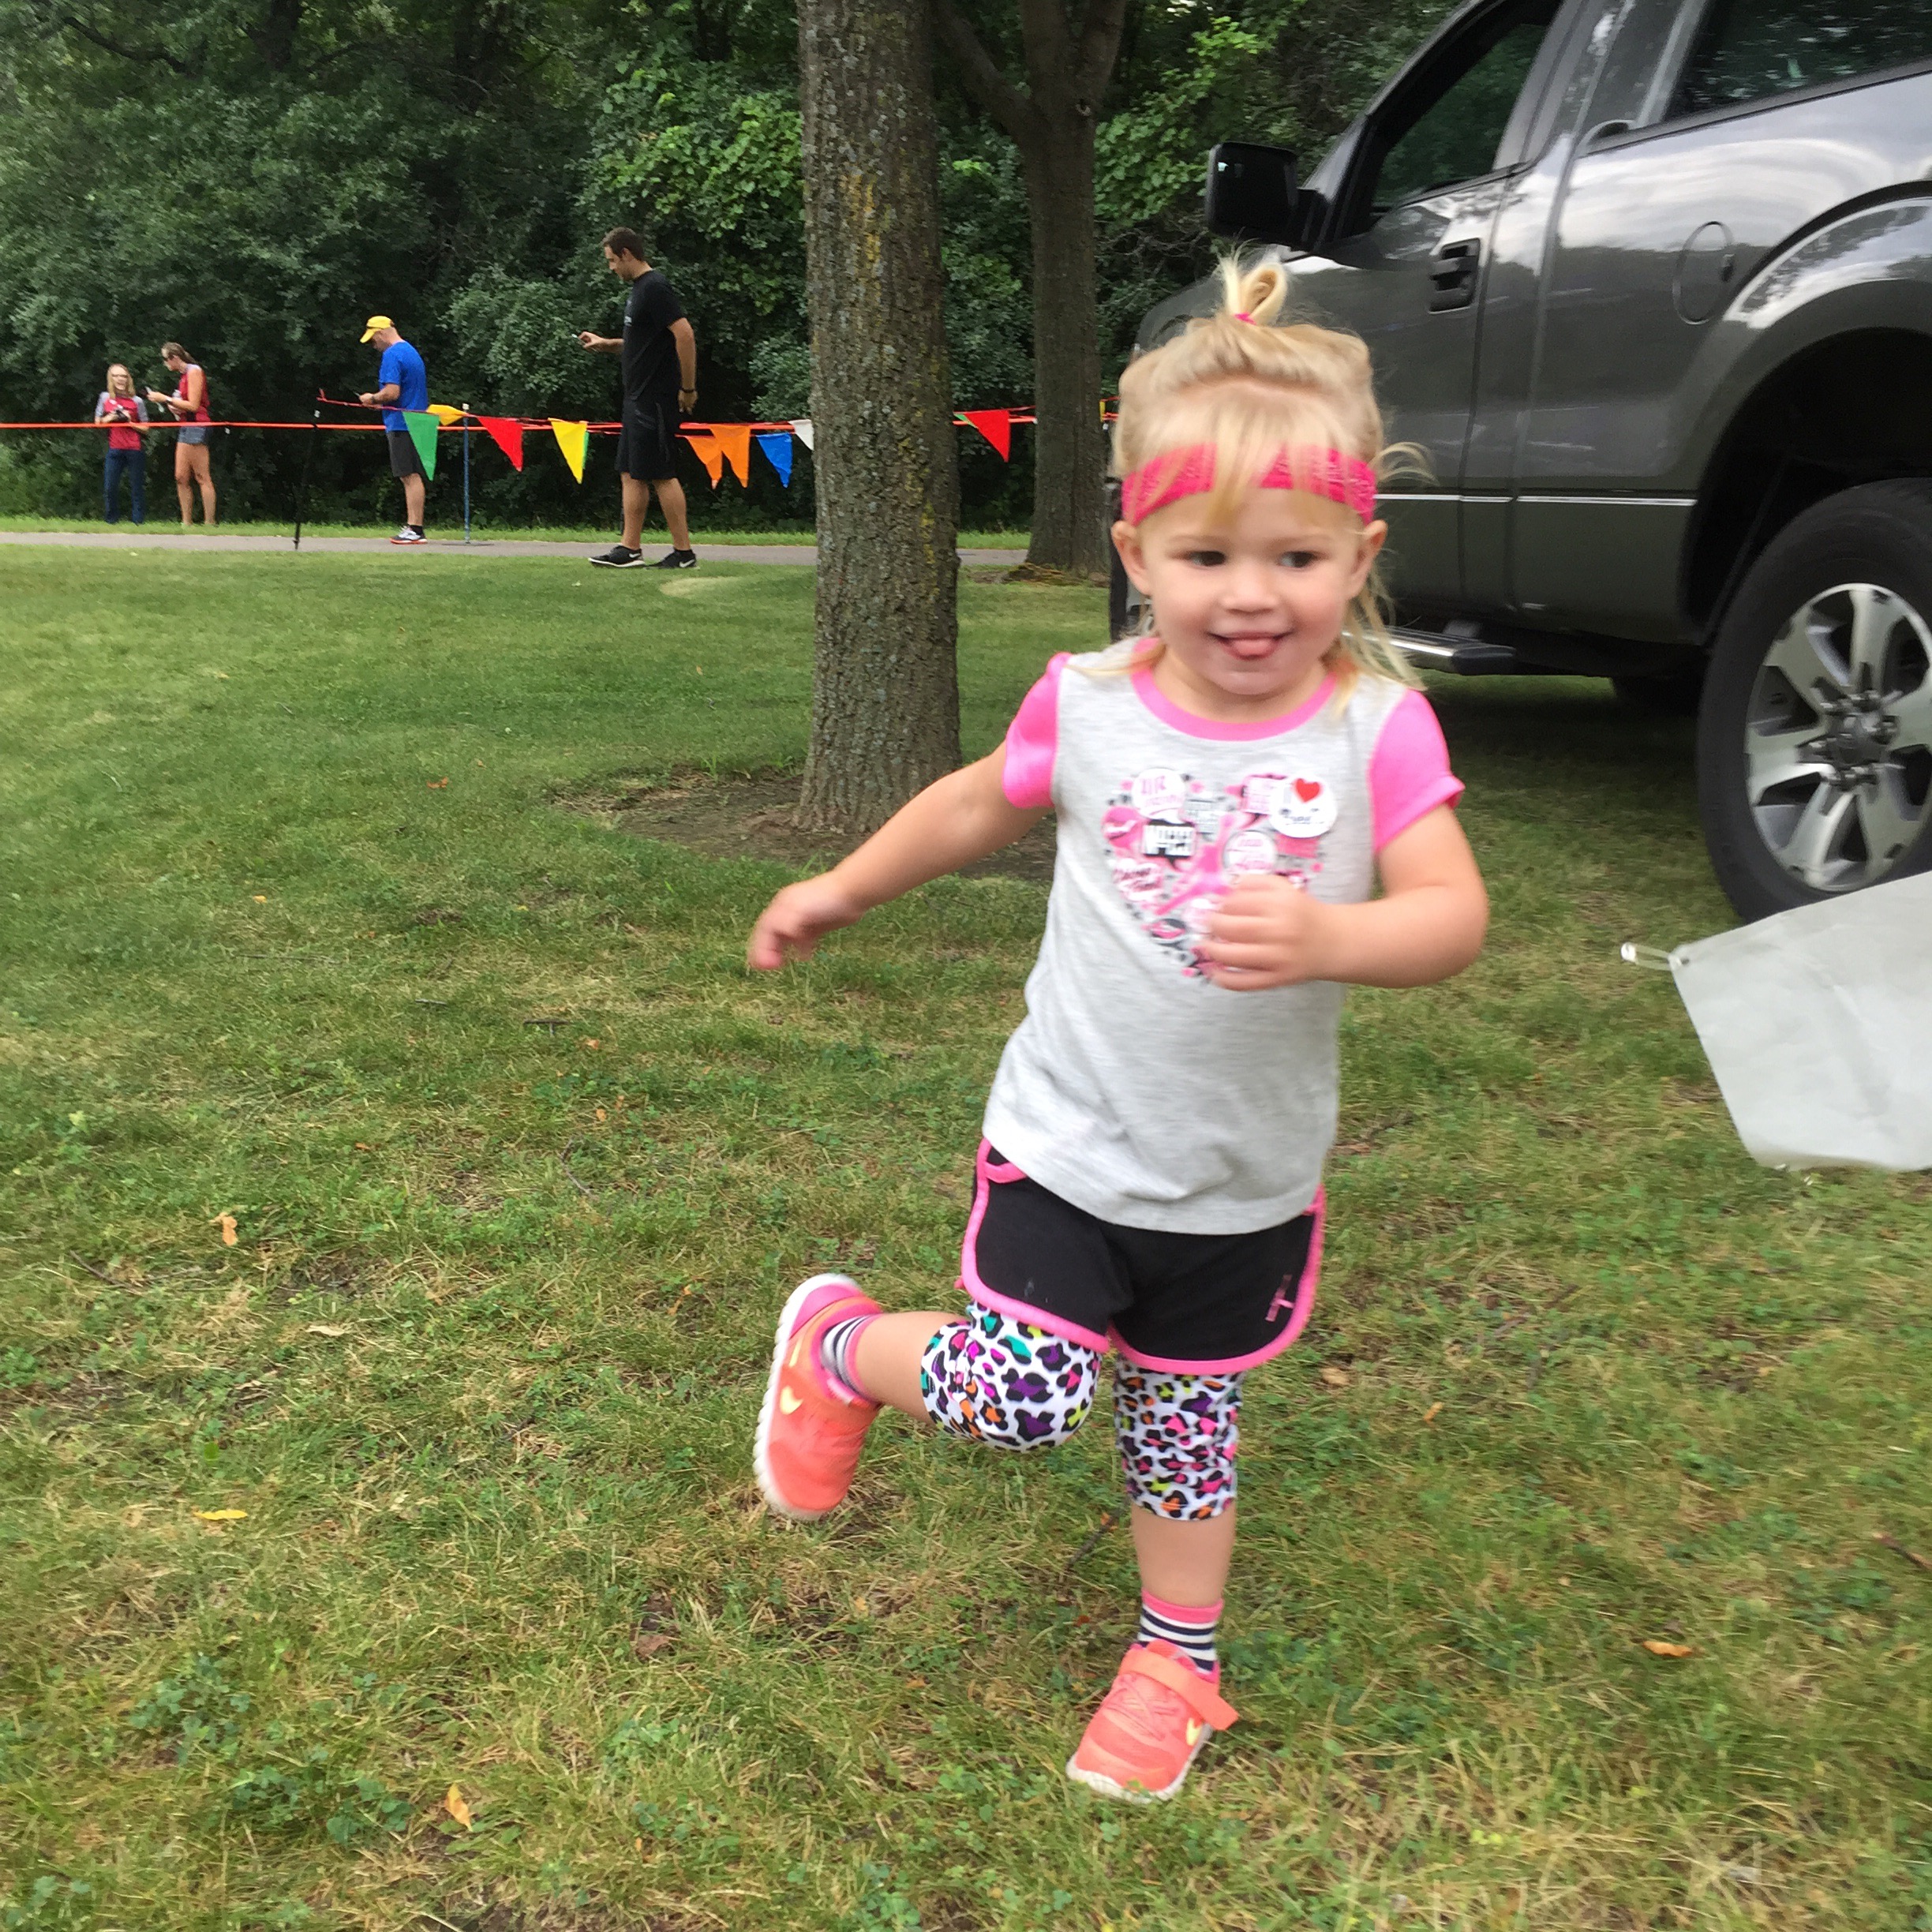 Kenley warming up for her 2nd race (age 2)